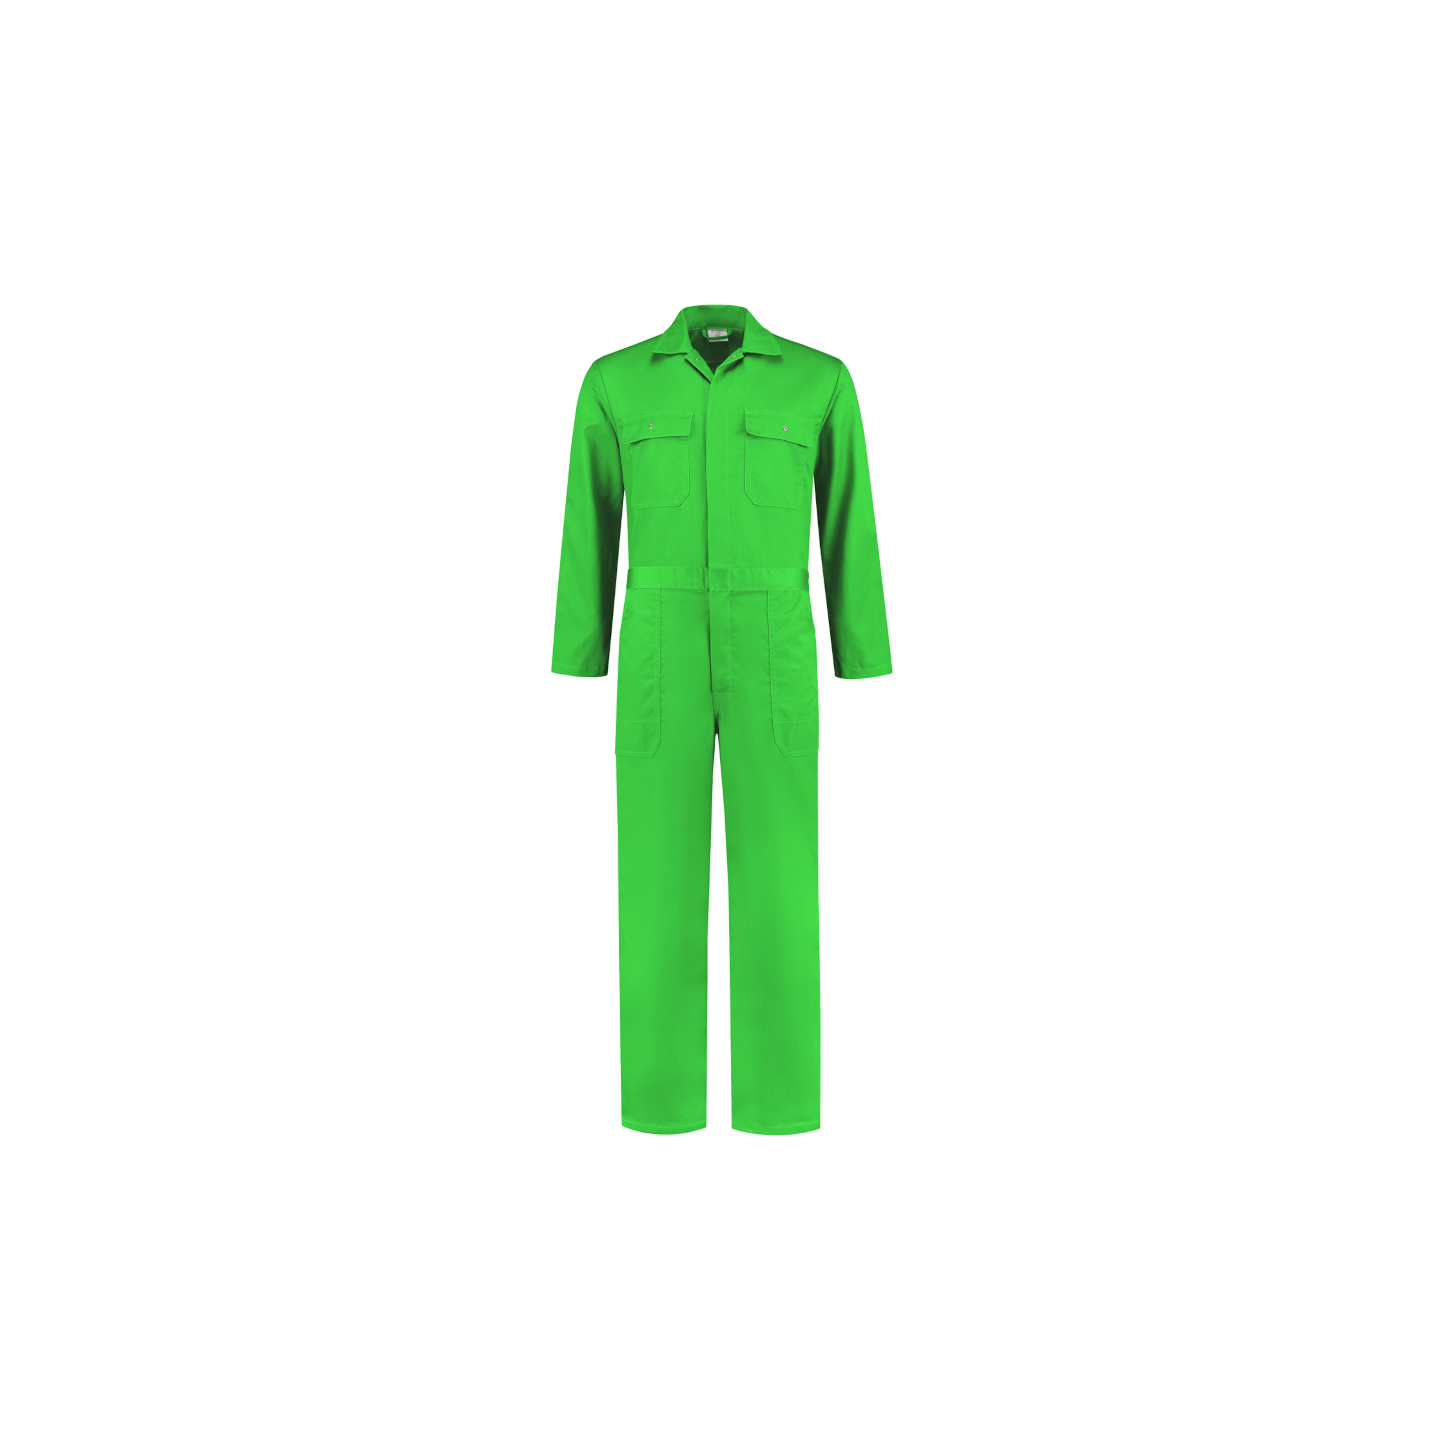 groene overall baby peuter carnaval